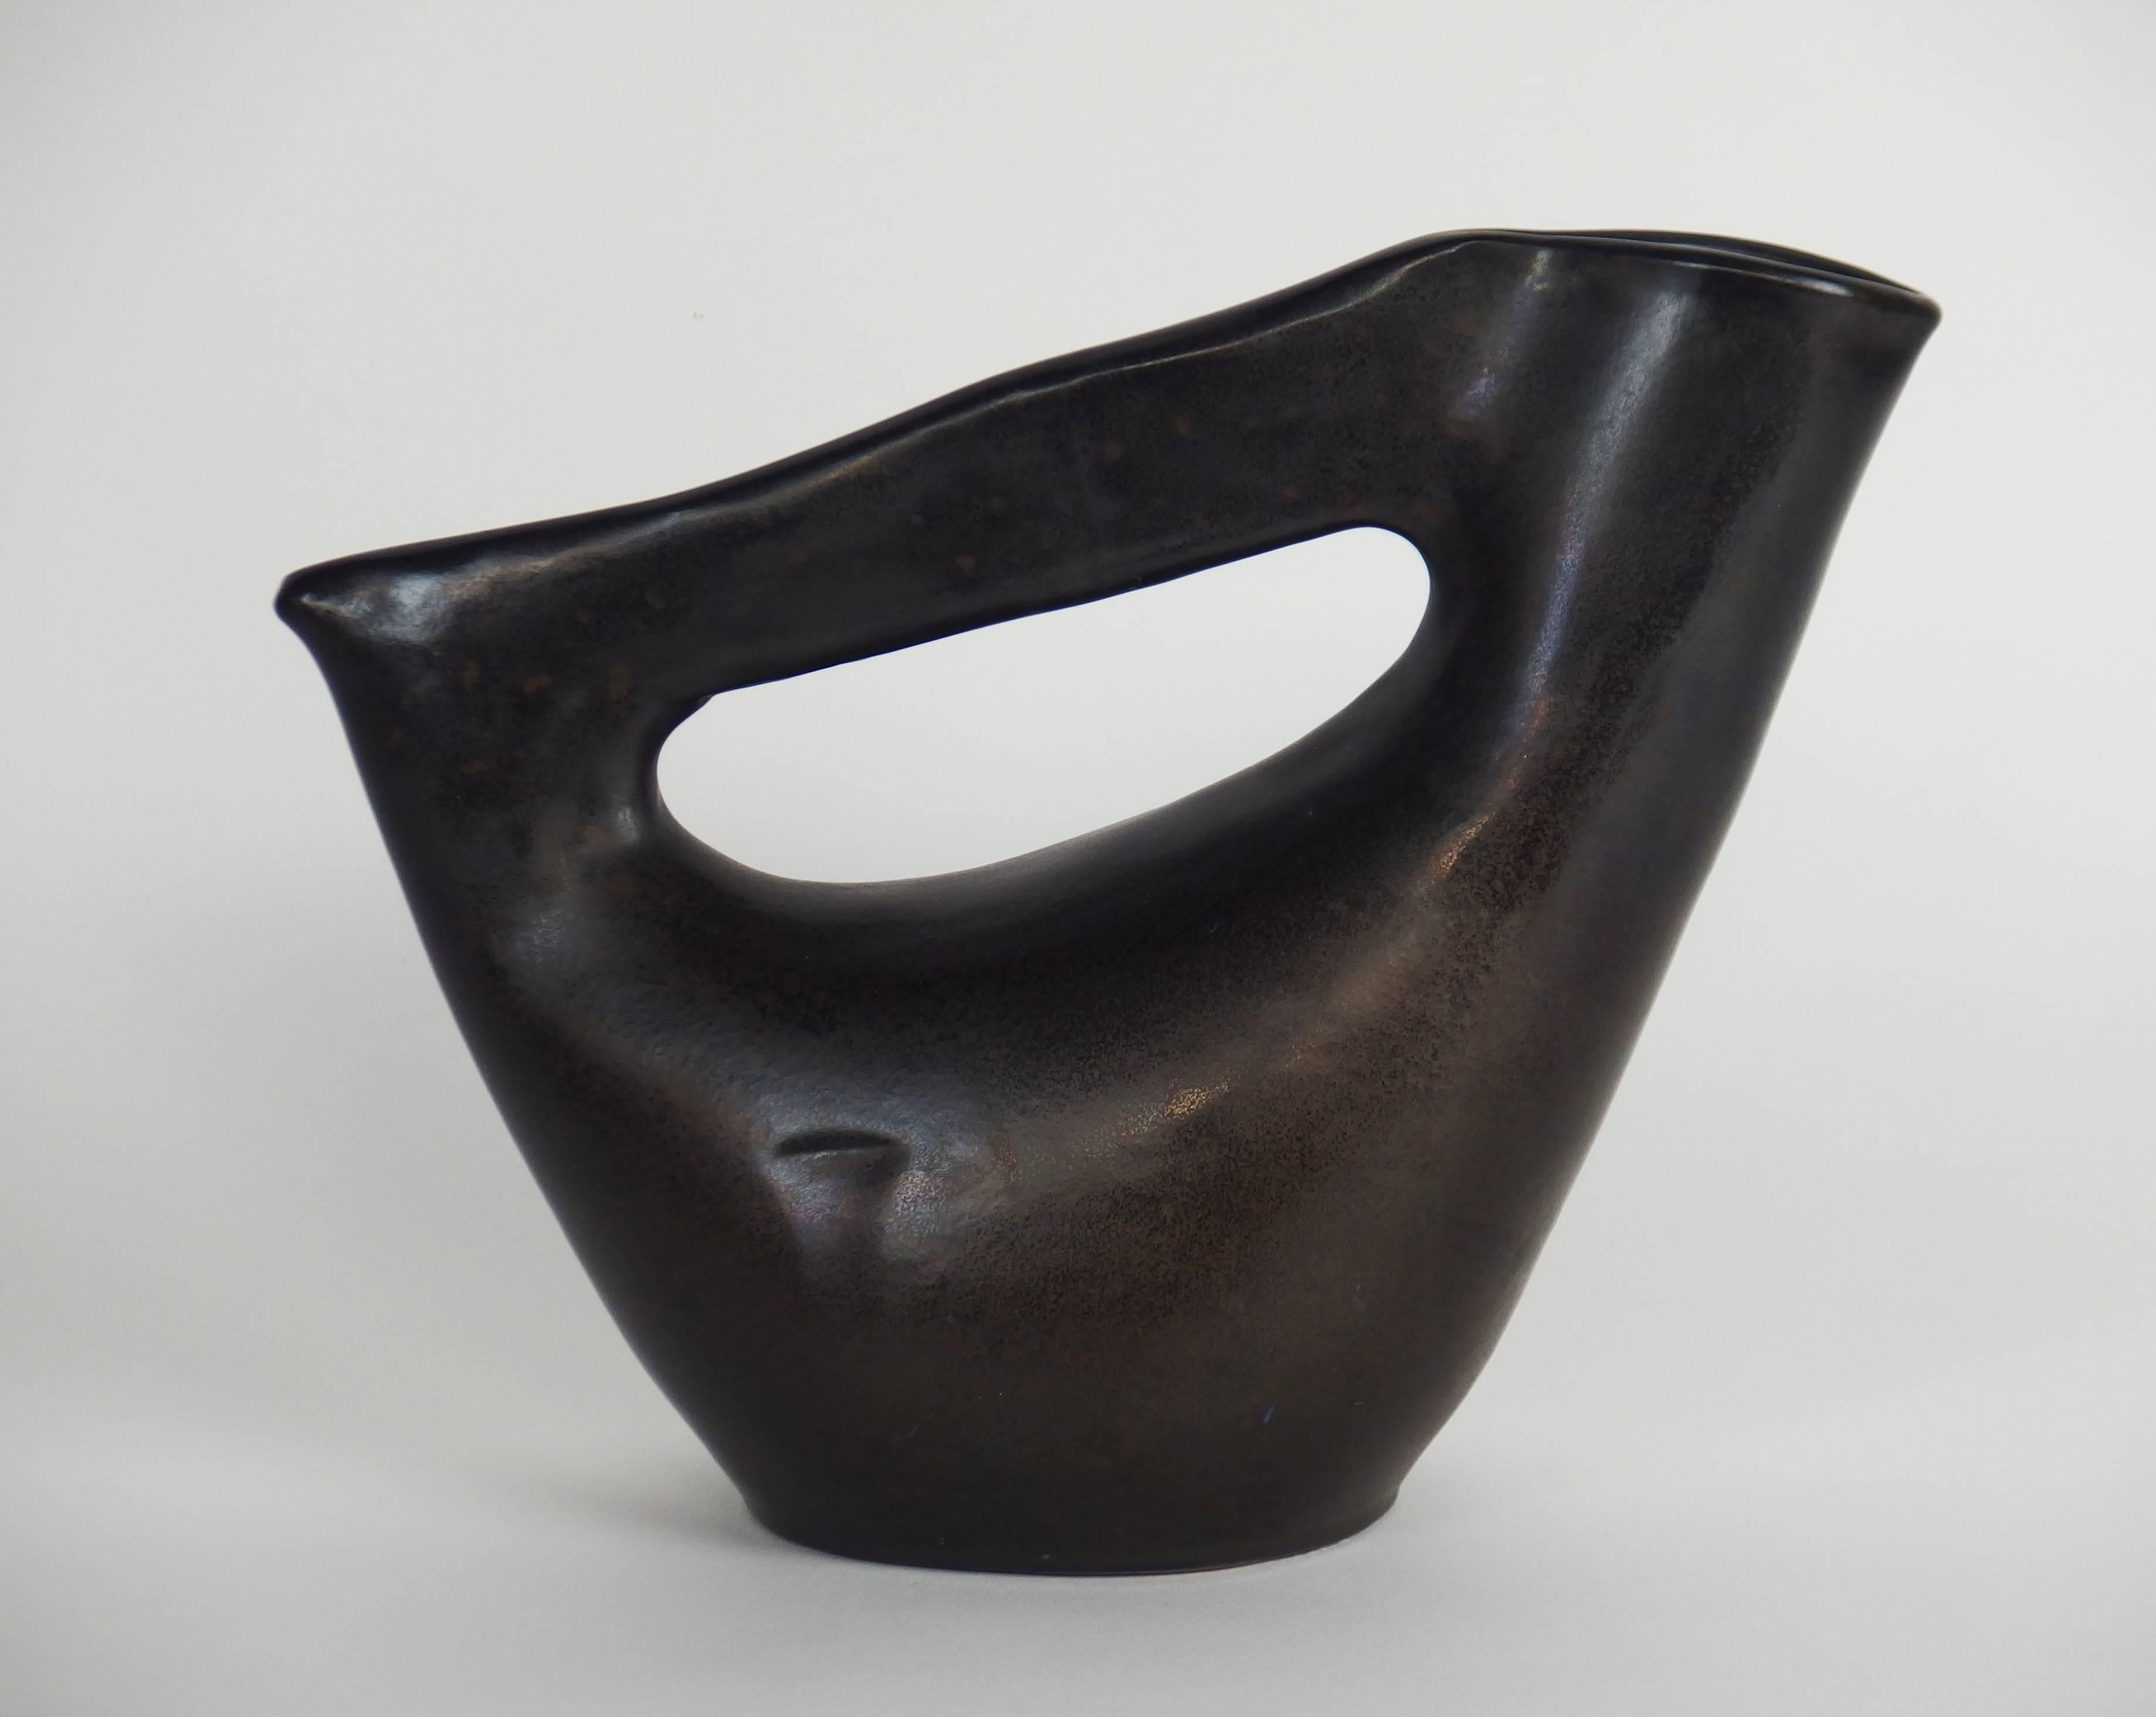 A rare black earthenware vase designed by Suzanne Ramié for Madoura.Stamped on the back, Madoura plein feu.
Suzanne Ramié stopped to produce this model when Picasso asked her to use this shape for his own creation.
Suzanne Ramié (1907-1974)created